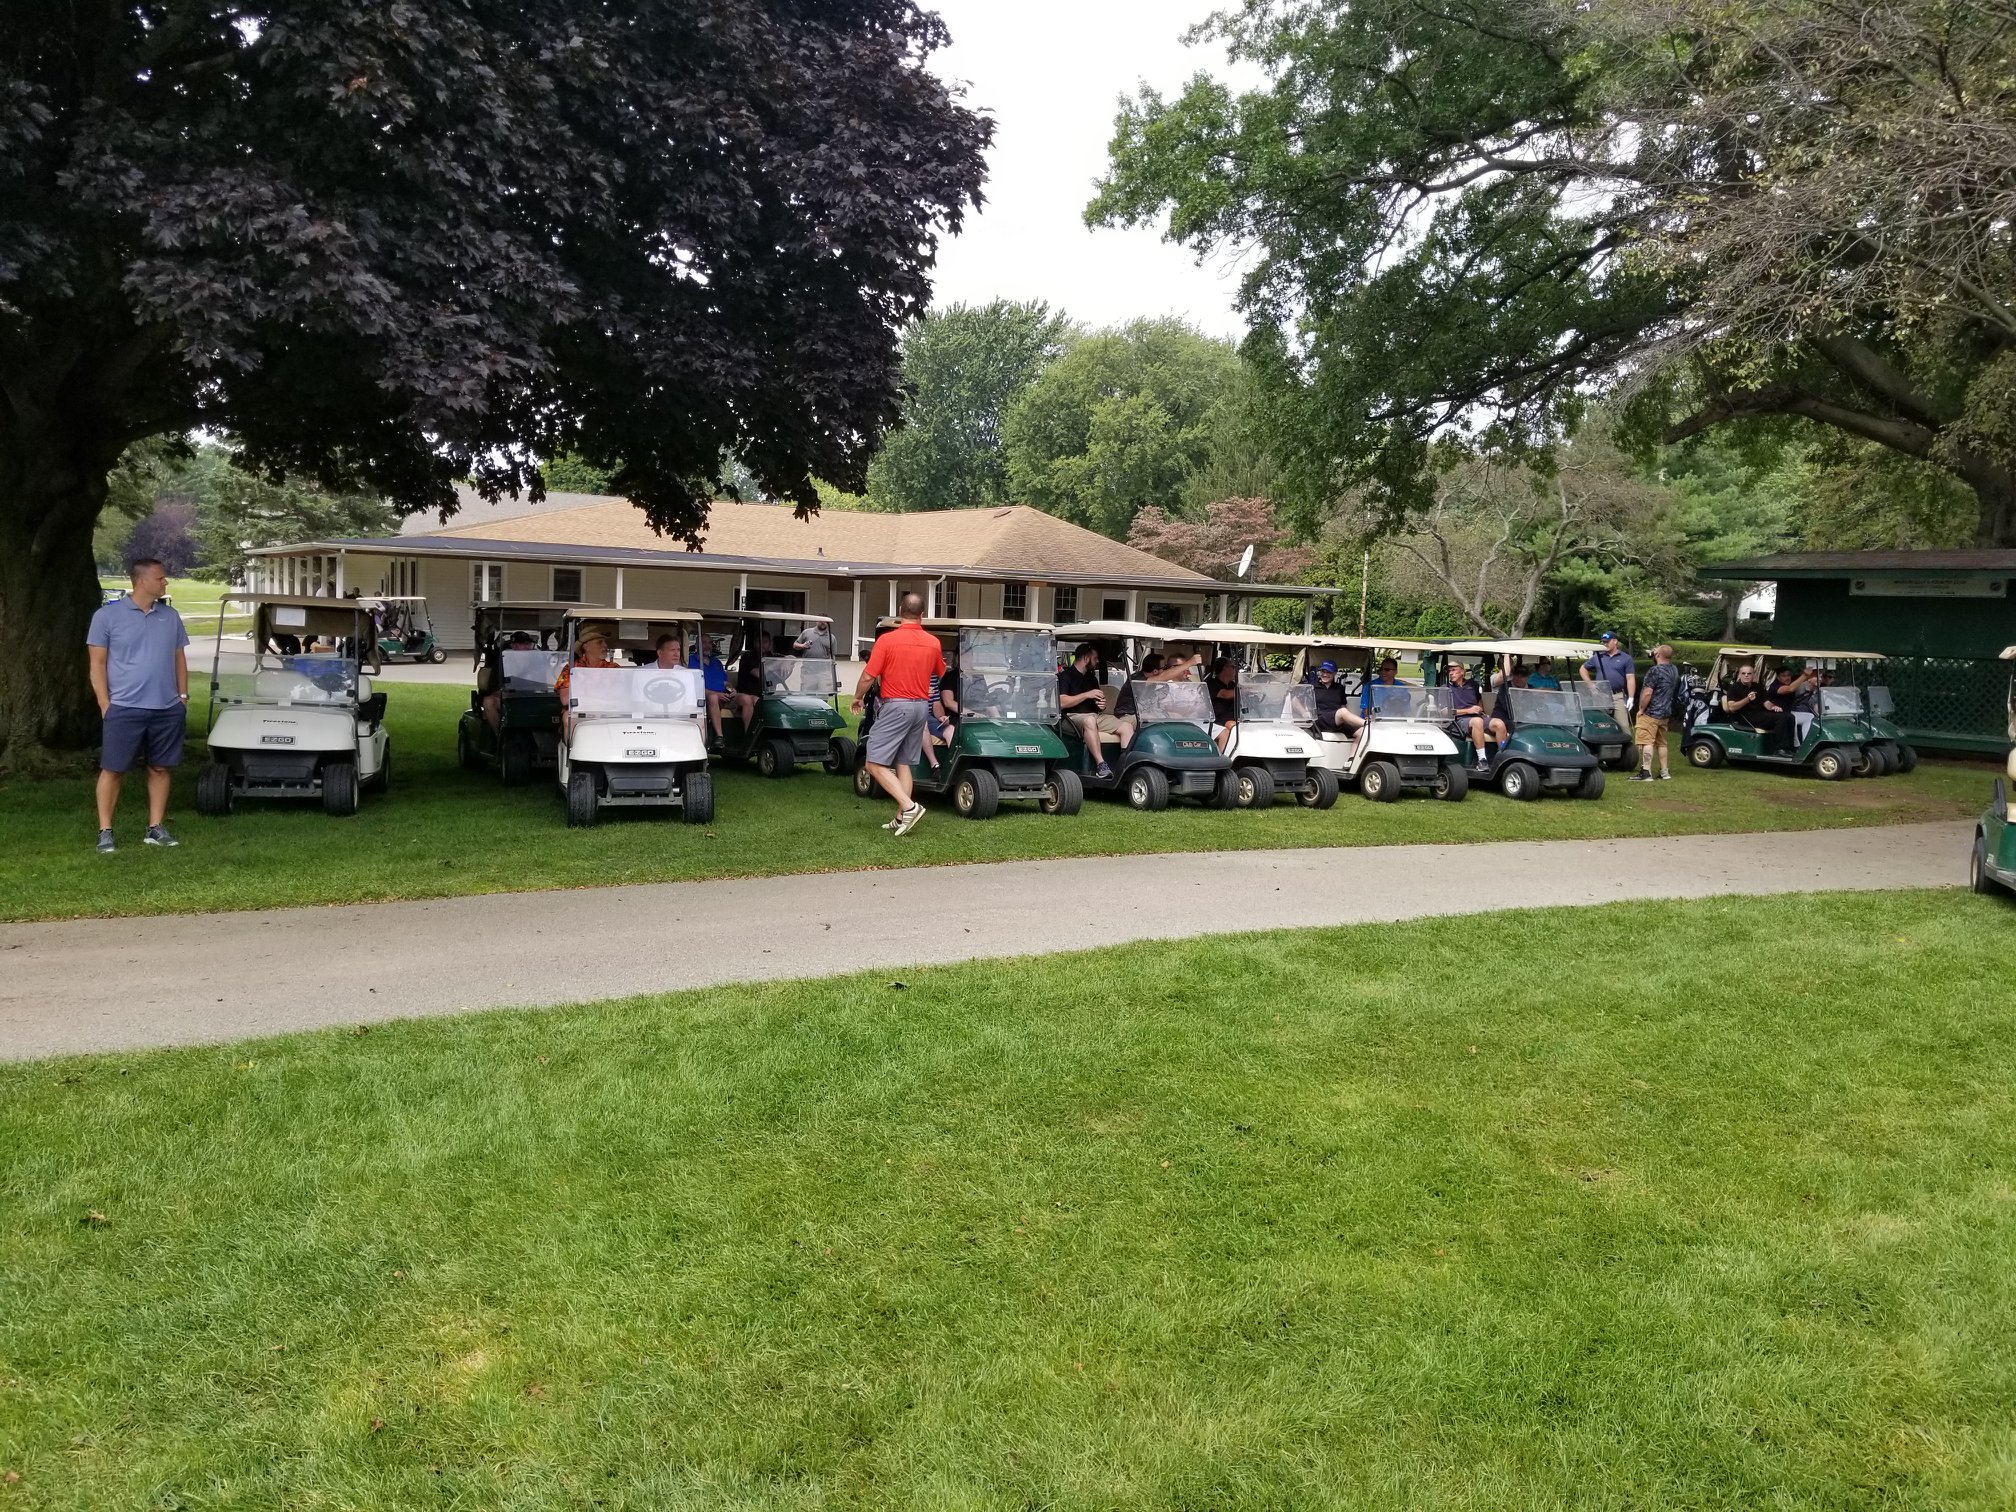 Enterprise Welding annual golf outing!